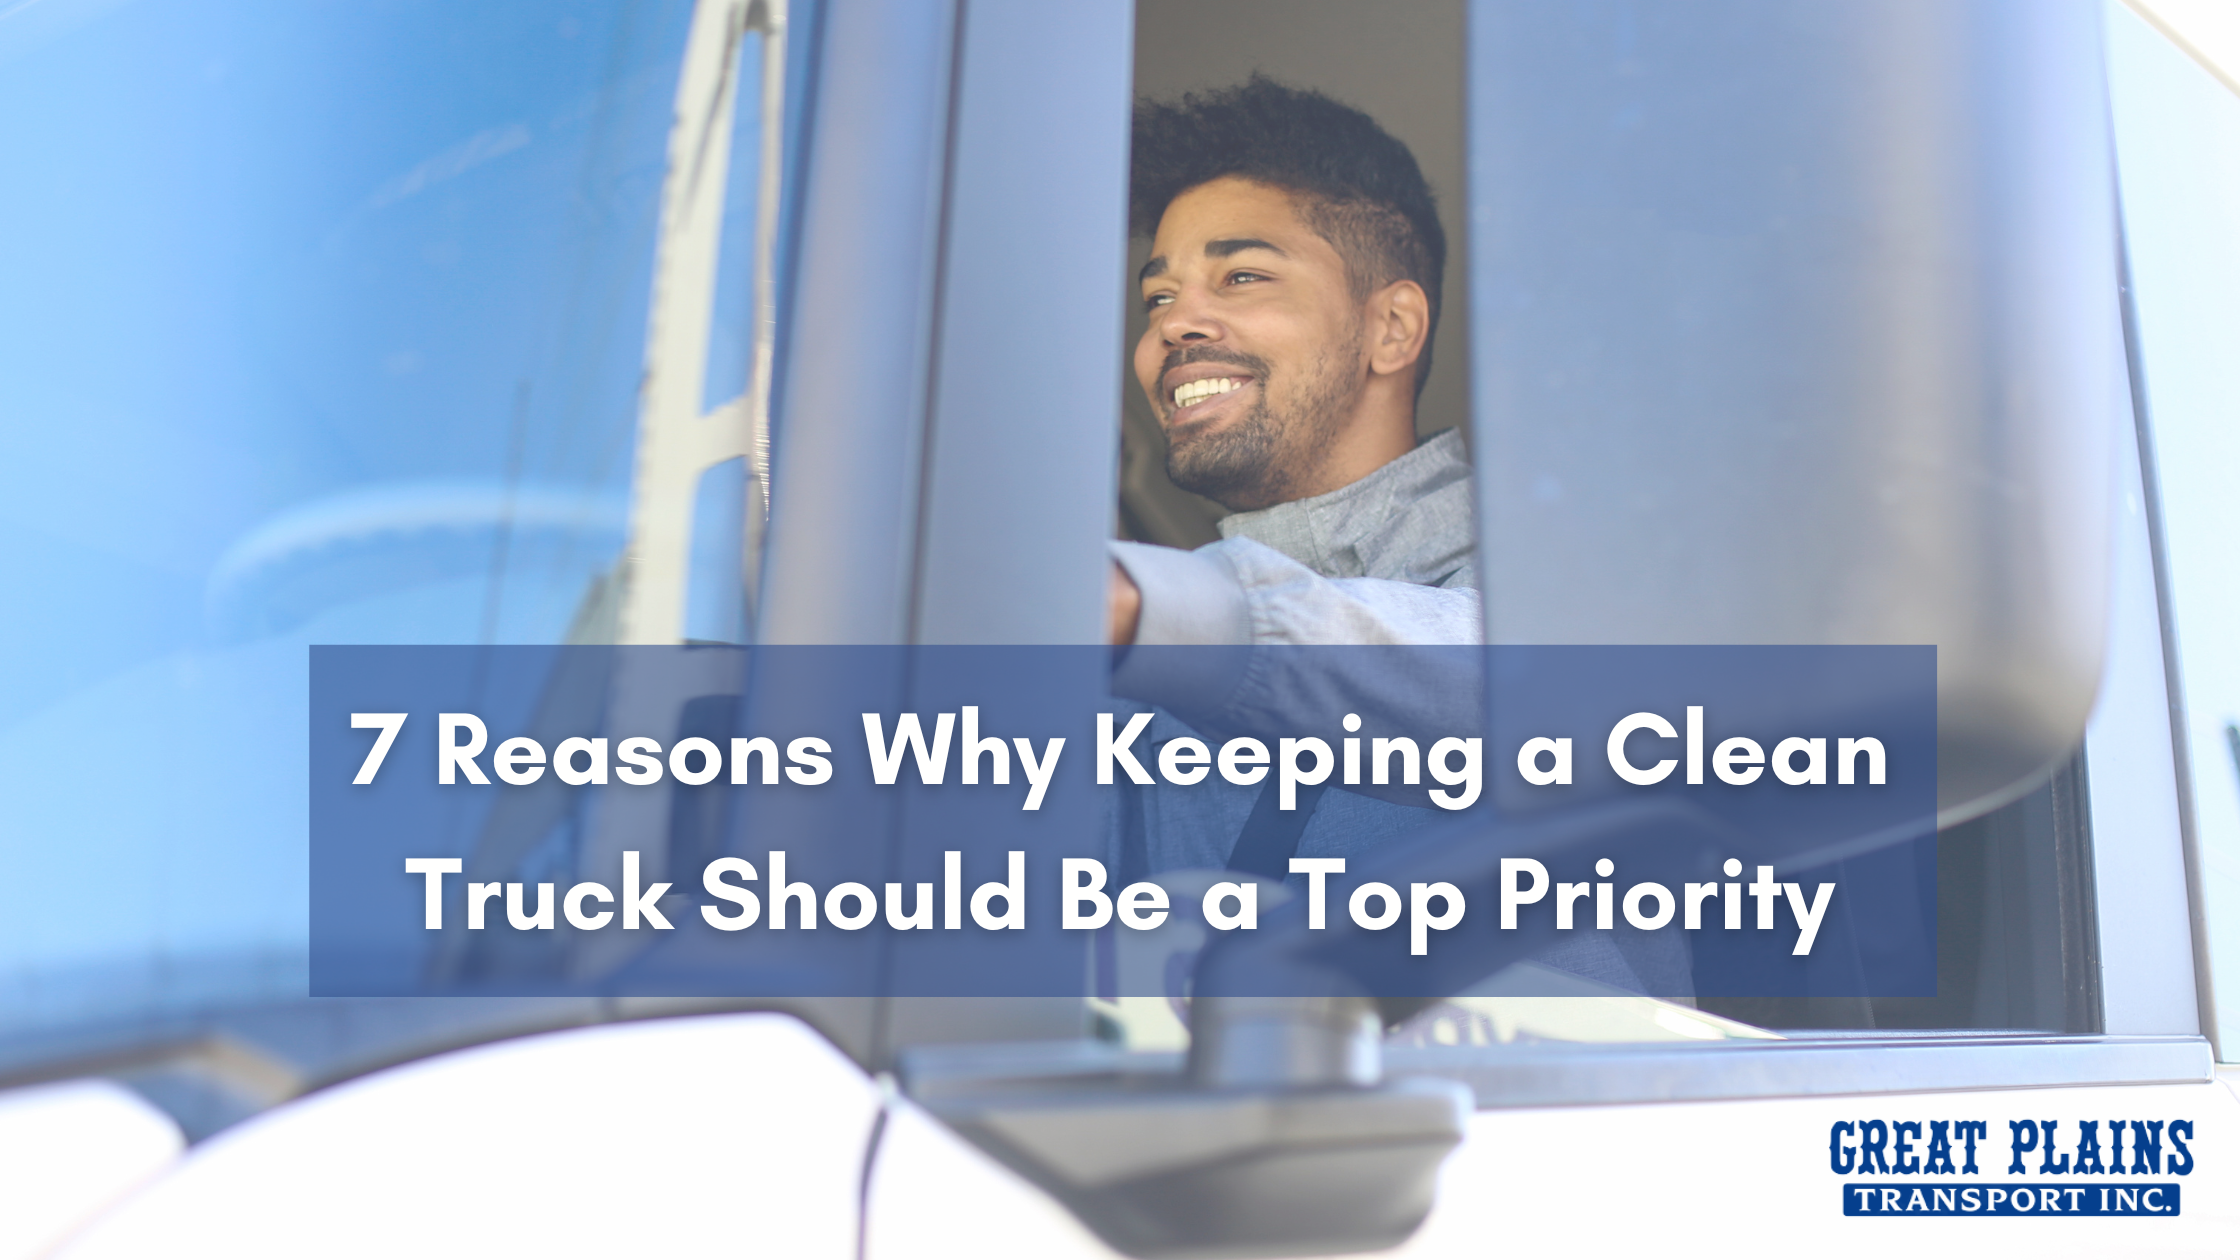 7 Reasons to Keep Your Truck Clean